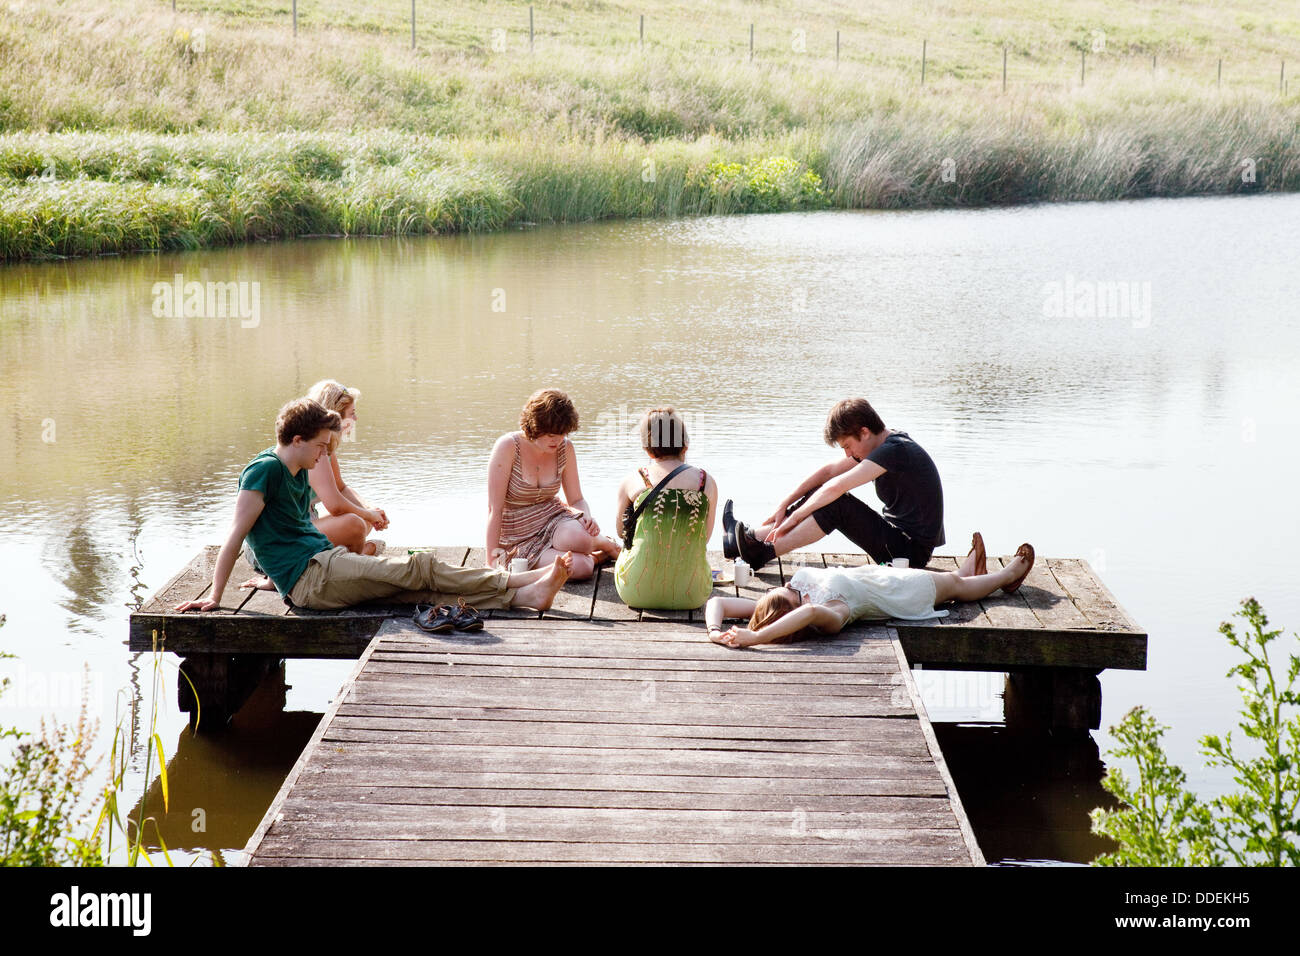 Summer people UK; A group of teenagers sitting on a jetty by a lake in summertime,  Lambourn, Berkshire England UK Stock Photo